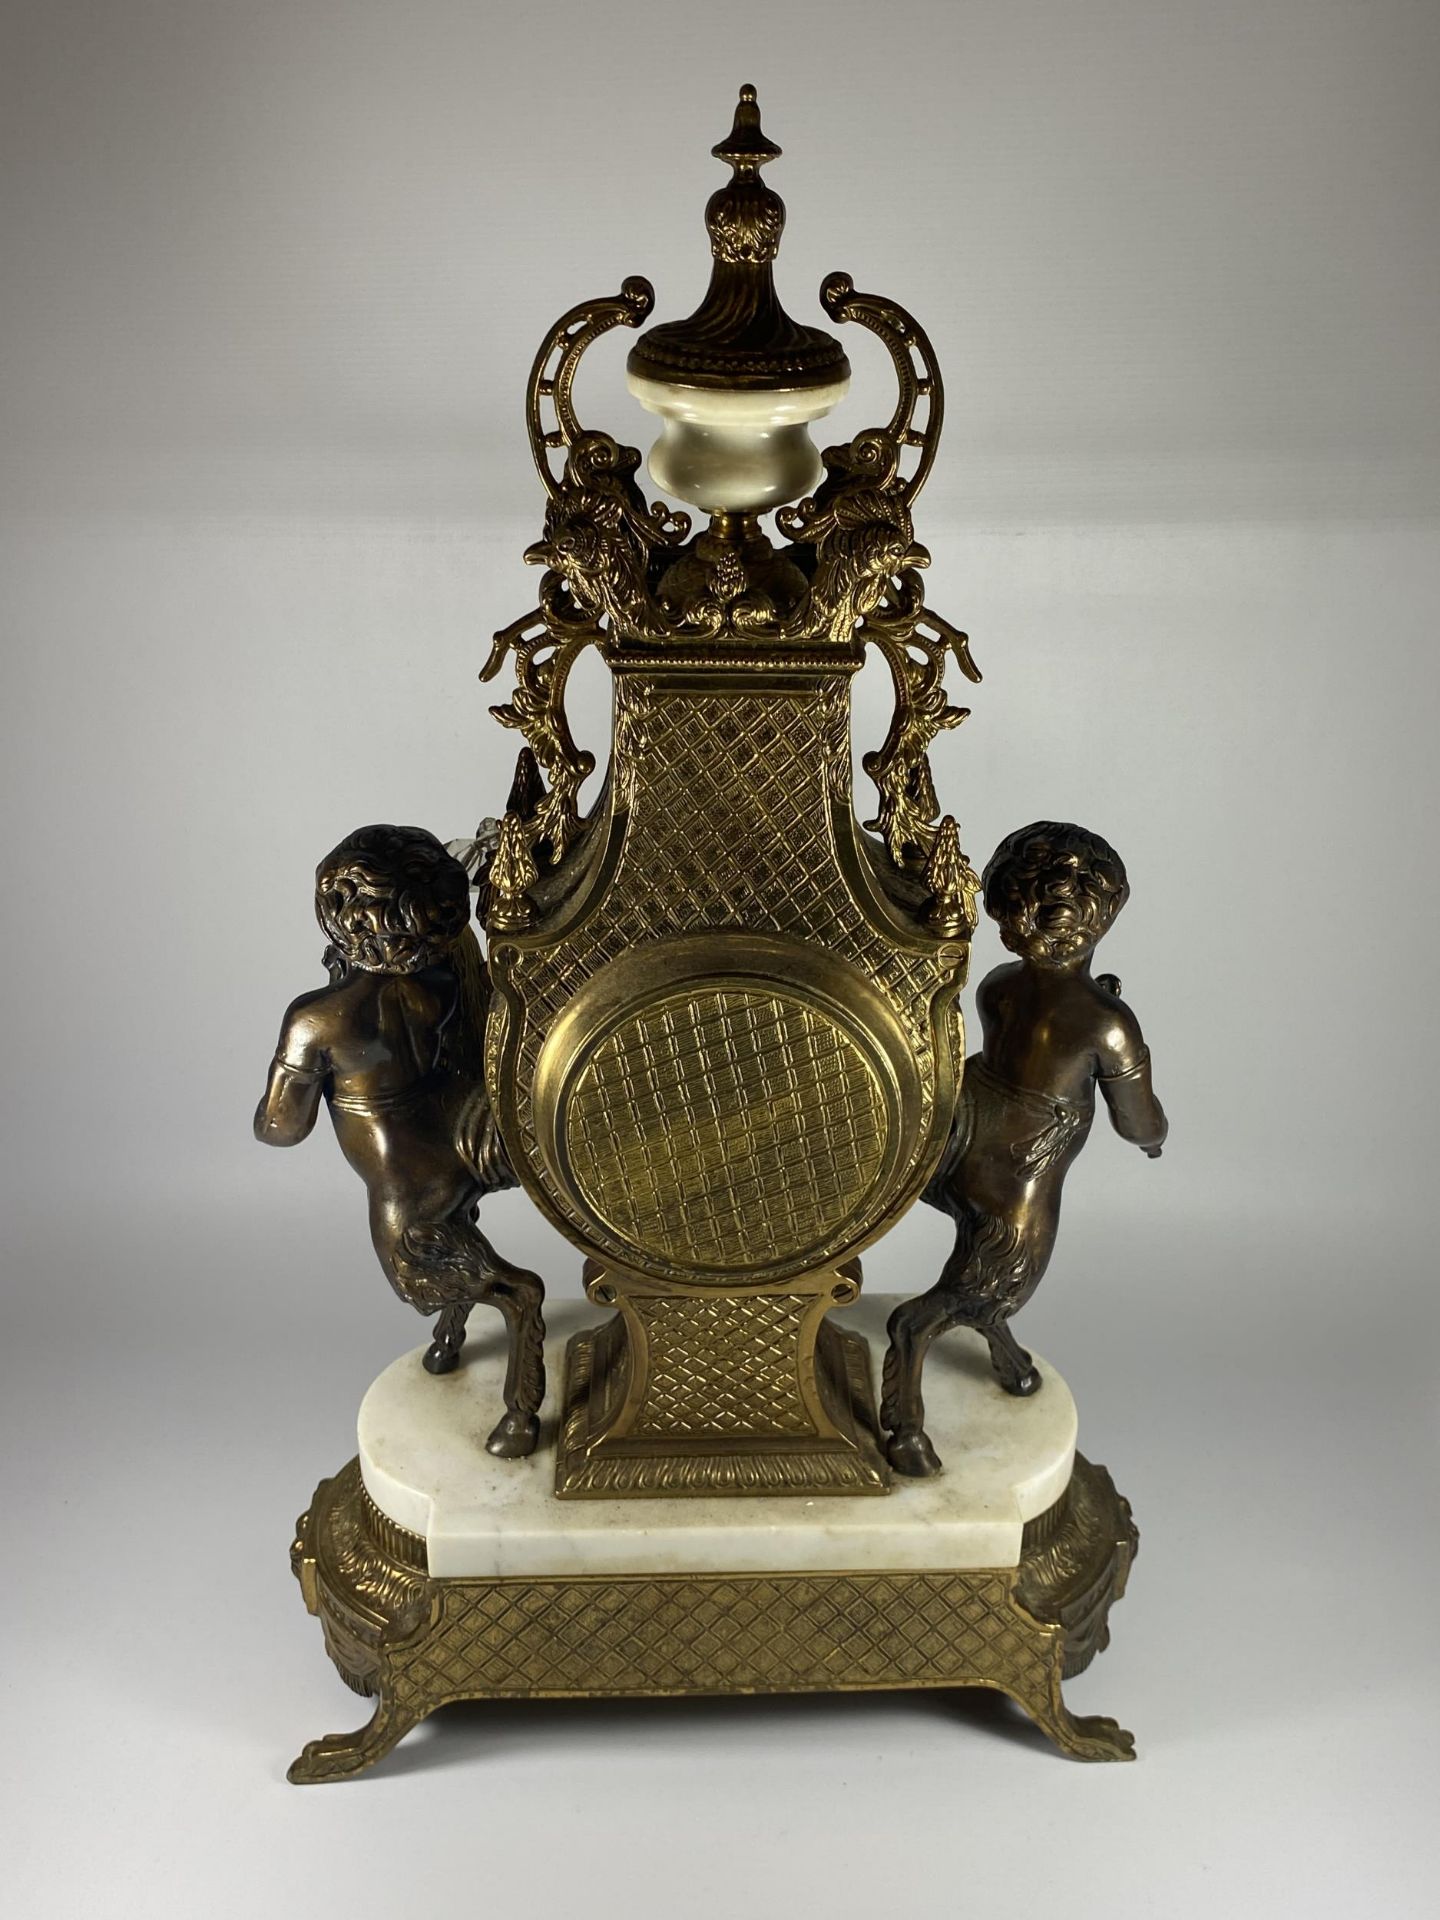 A C.1900 ITALIAN REPRODUCTION MANTLE CLOCK BY IMPERIAL IN BRASS WITH MARBLE BASE AND CHERUBS, HEIGHT - Image 4 of 5